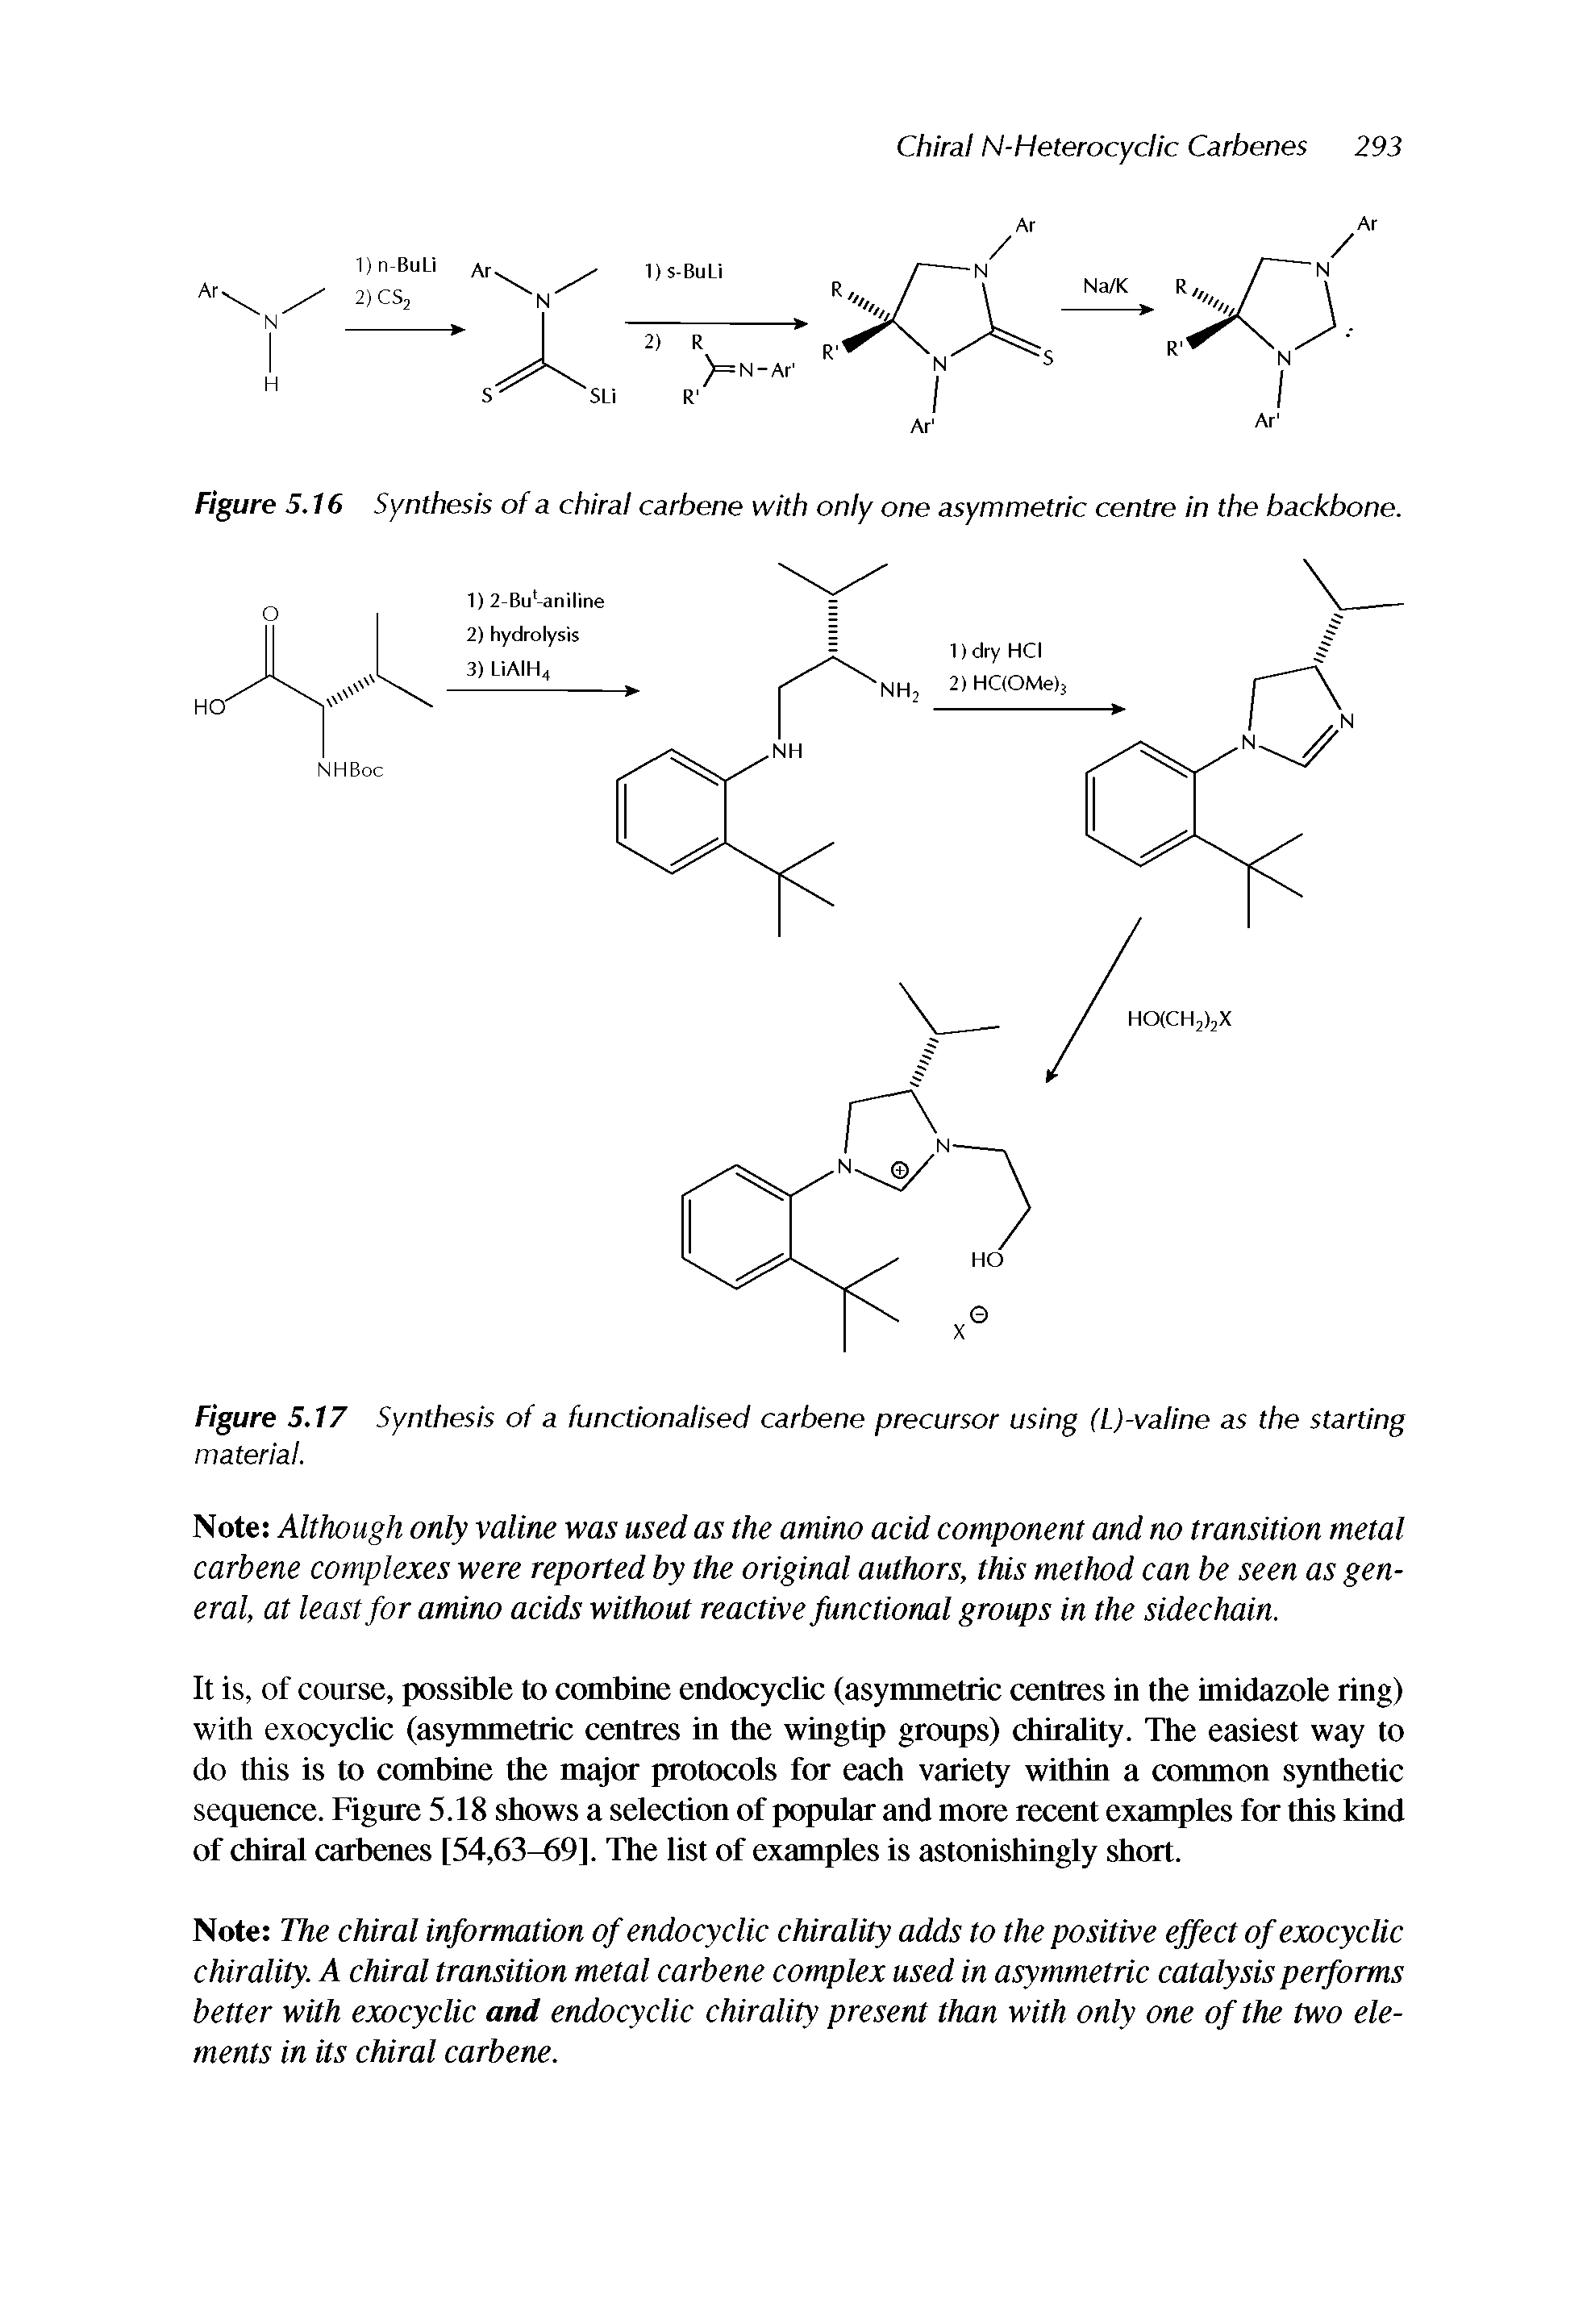 Figure 5.16 Synthesis of a chiral carbene with only one asymmetric centre in the backbone.